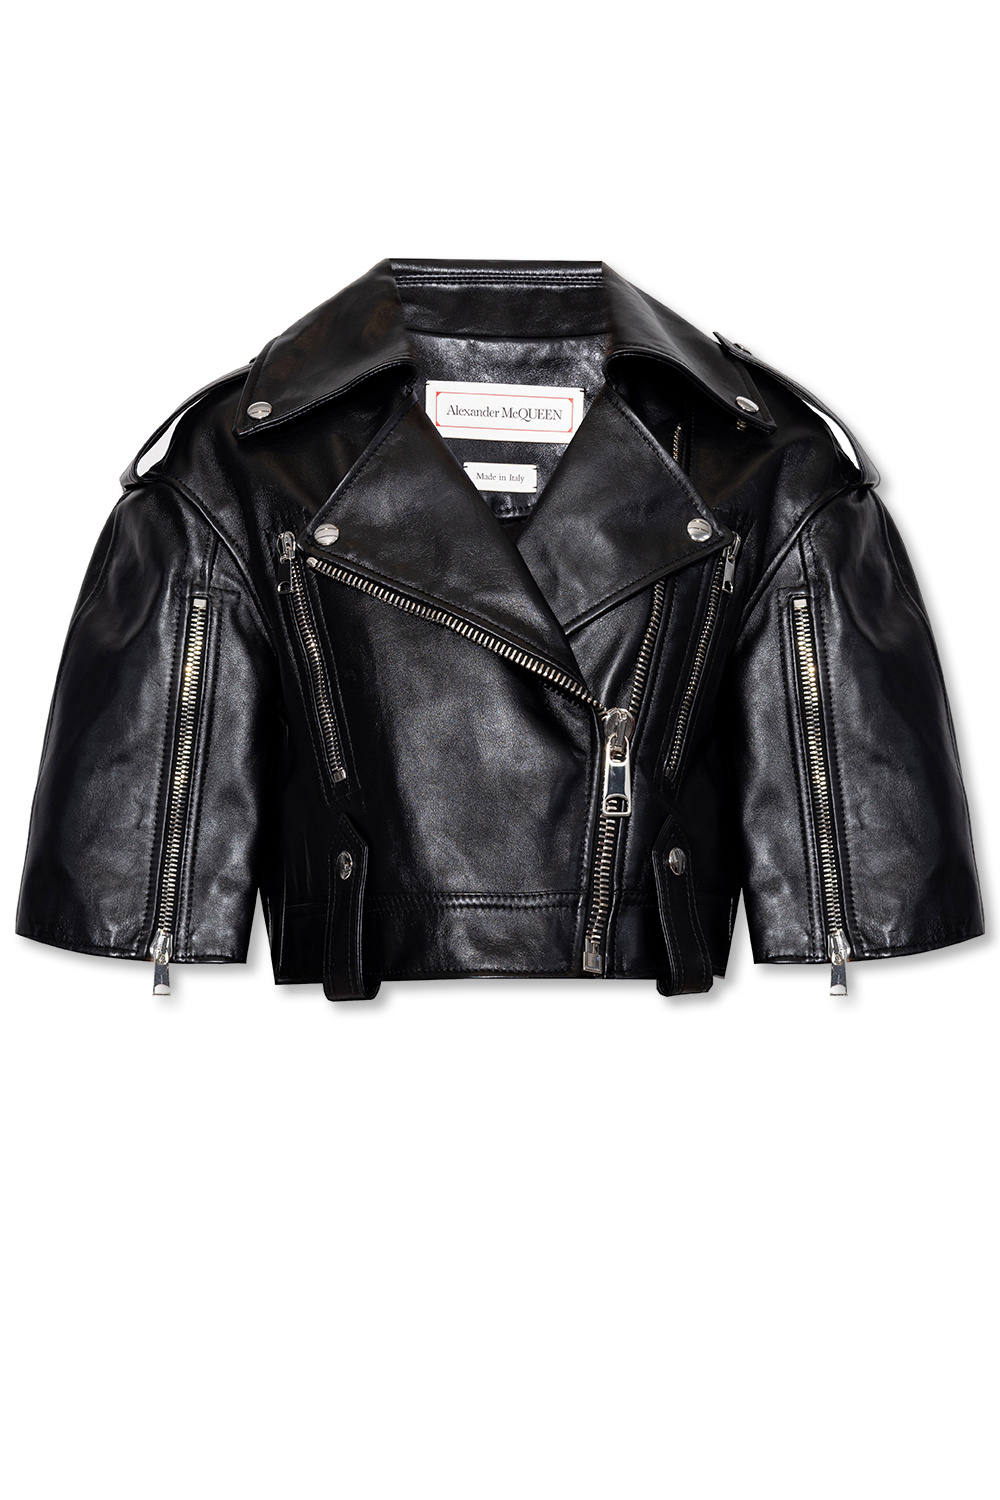 Alexander McQueen Cropped Leather Biker Jacket in Black Womens Clothing Jackets Leather jackets 